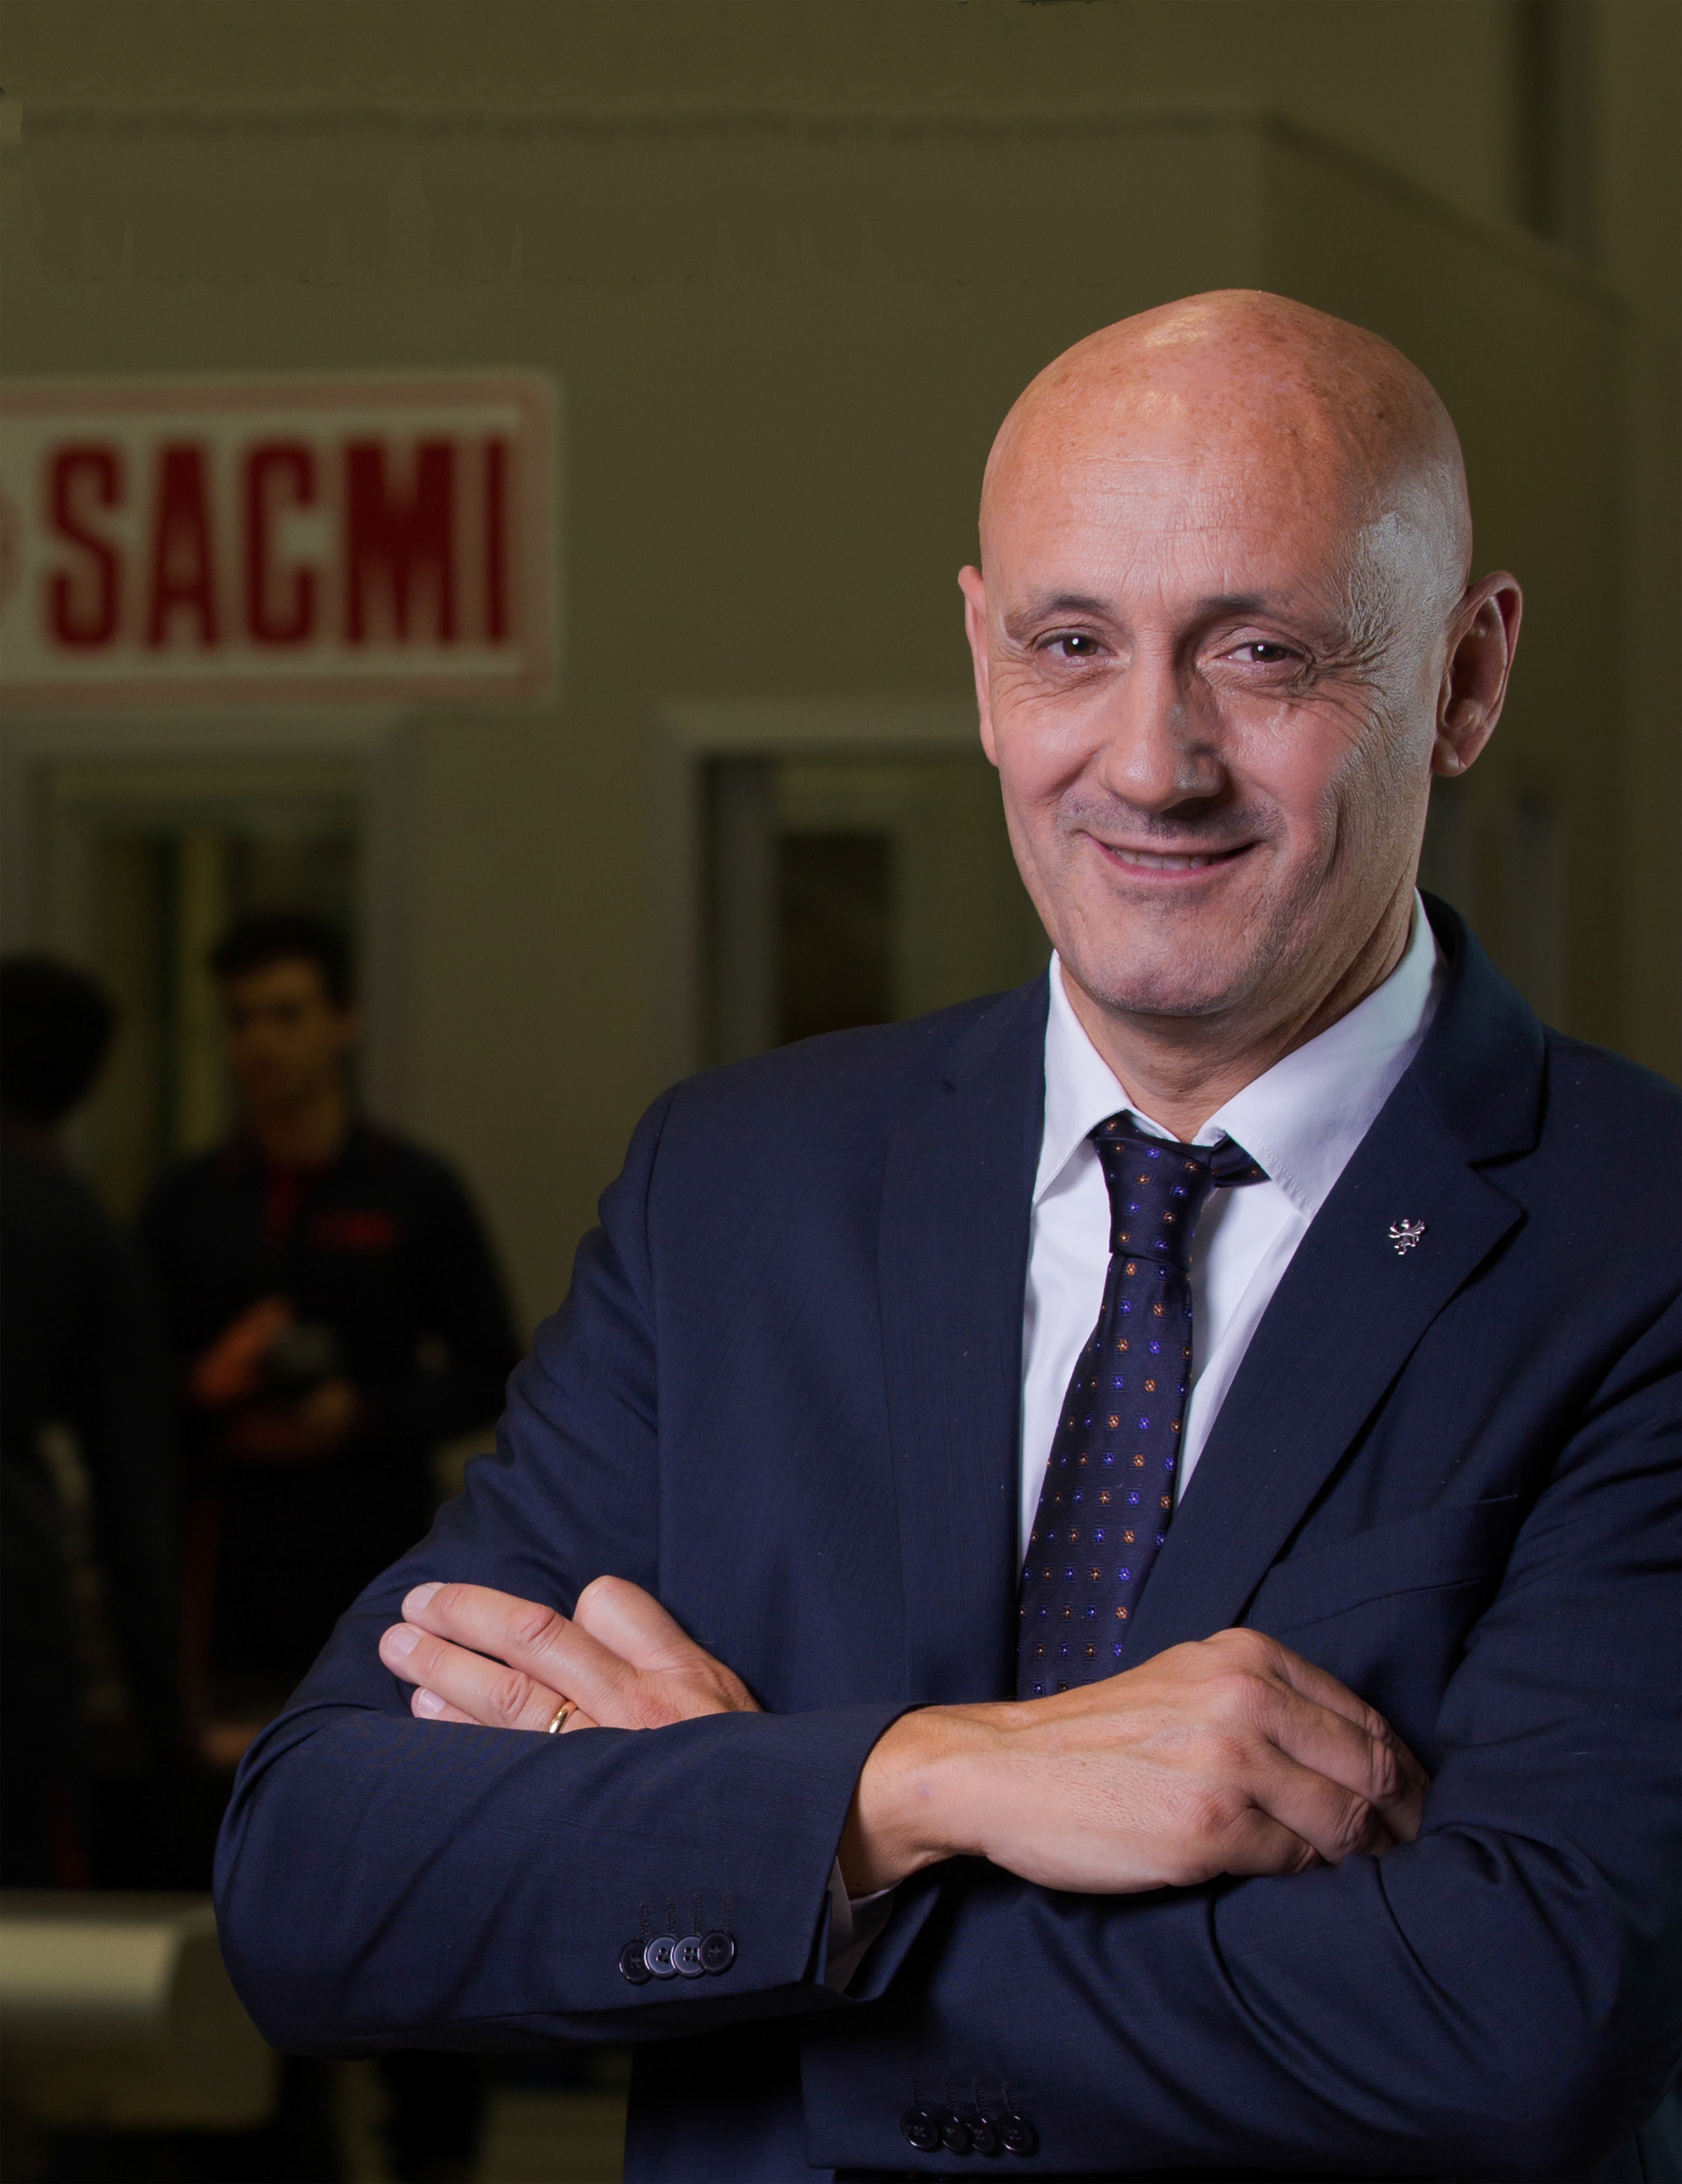 SACMI approves the 2018 Financial Statement, with sales at 1.44 BLN euro